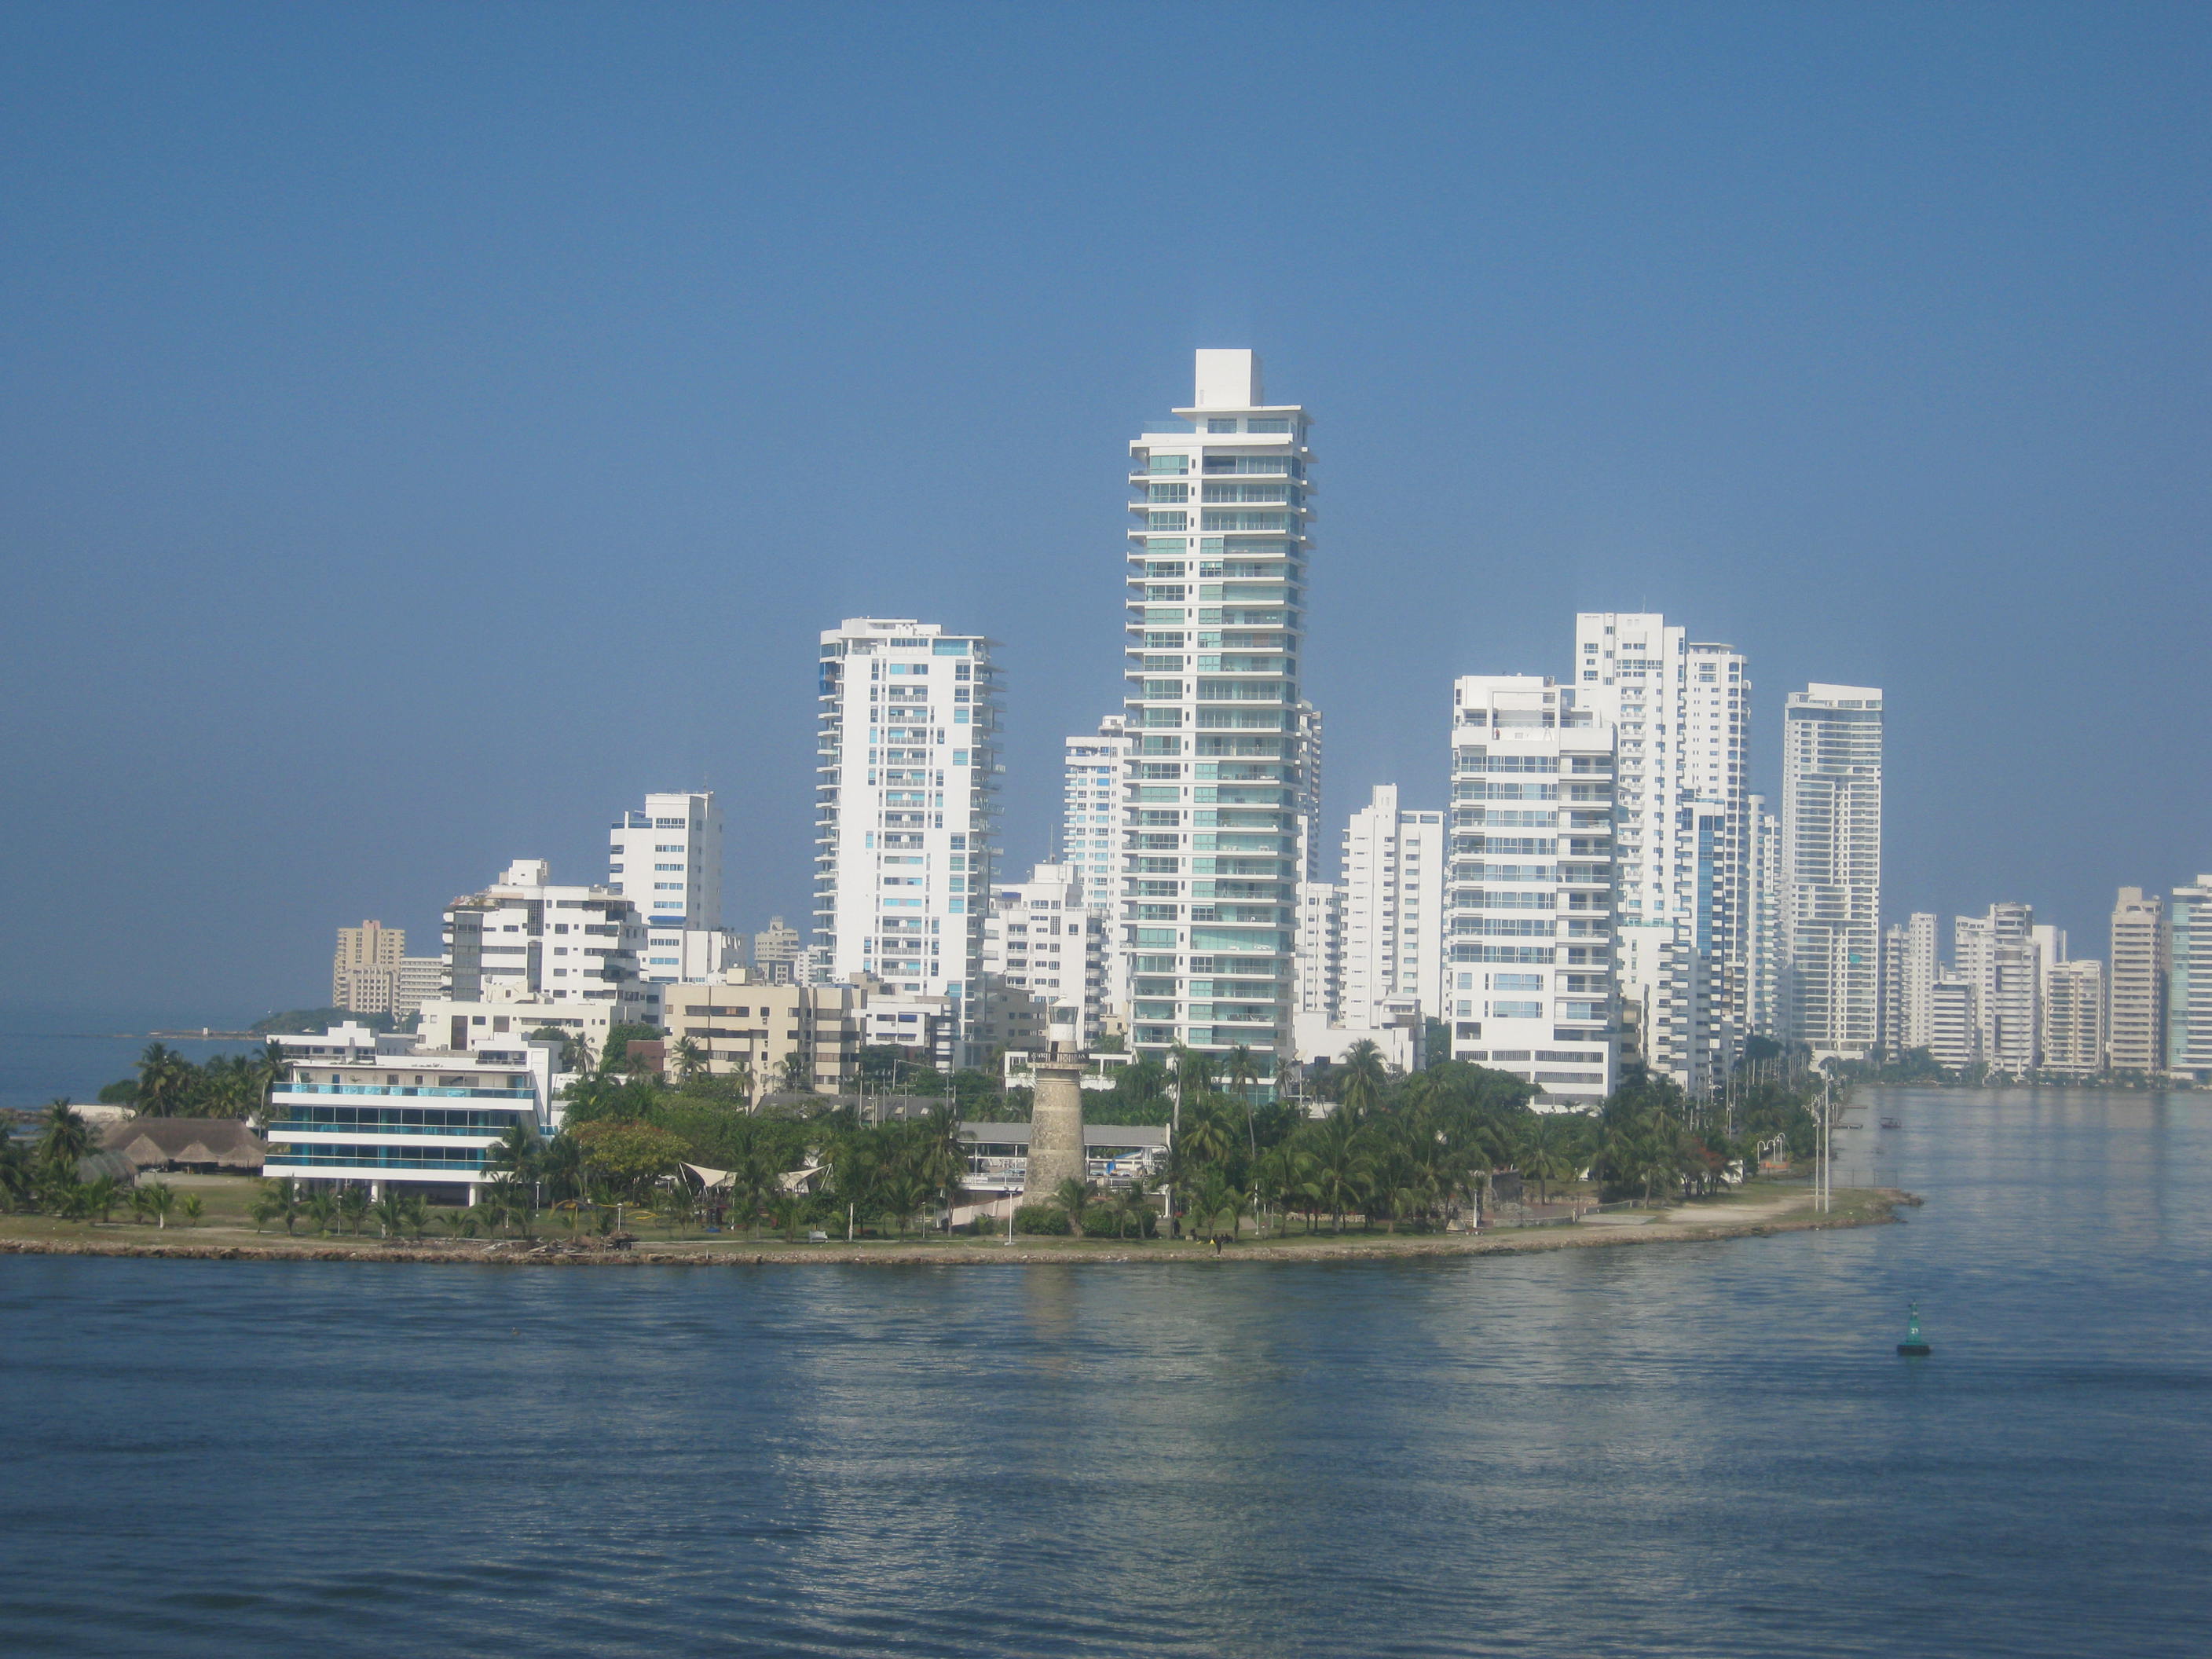 Cartagena Beach Tavel Wallpaper Pictures Colombia Picture Image